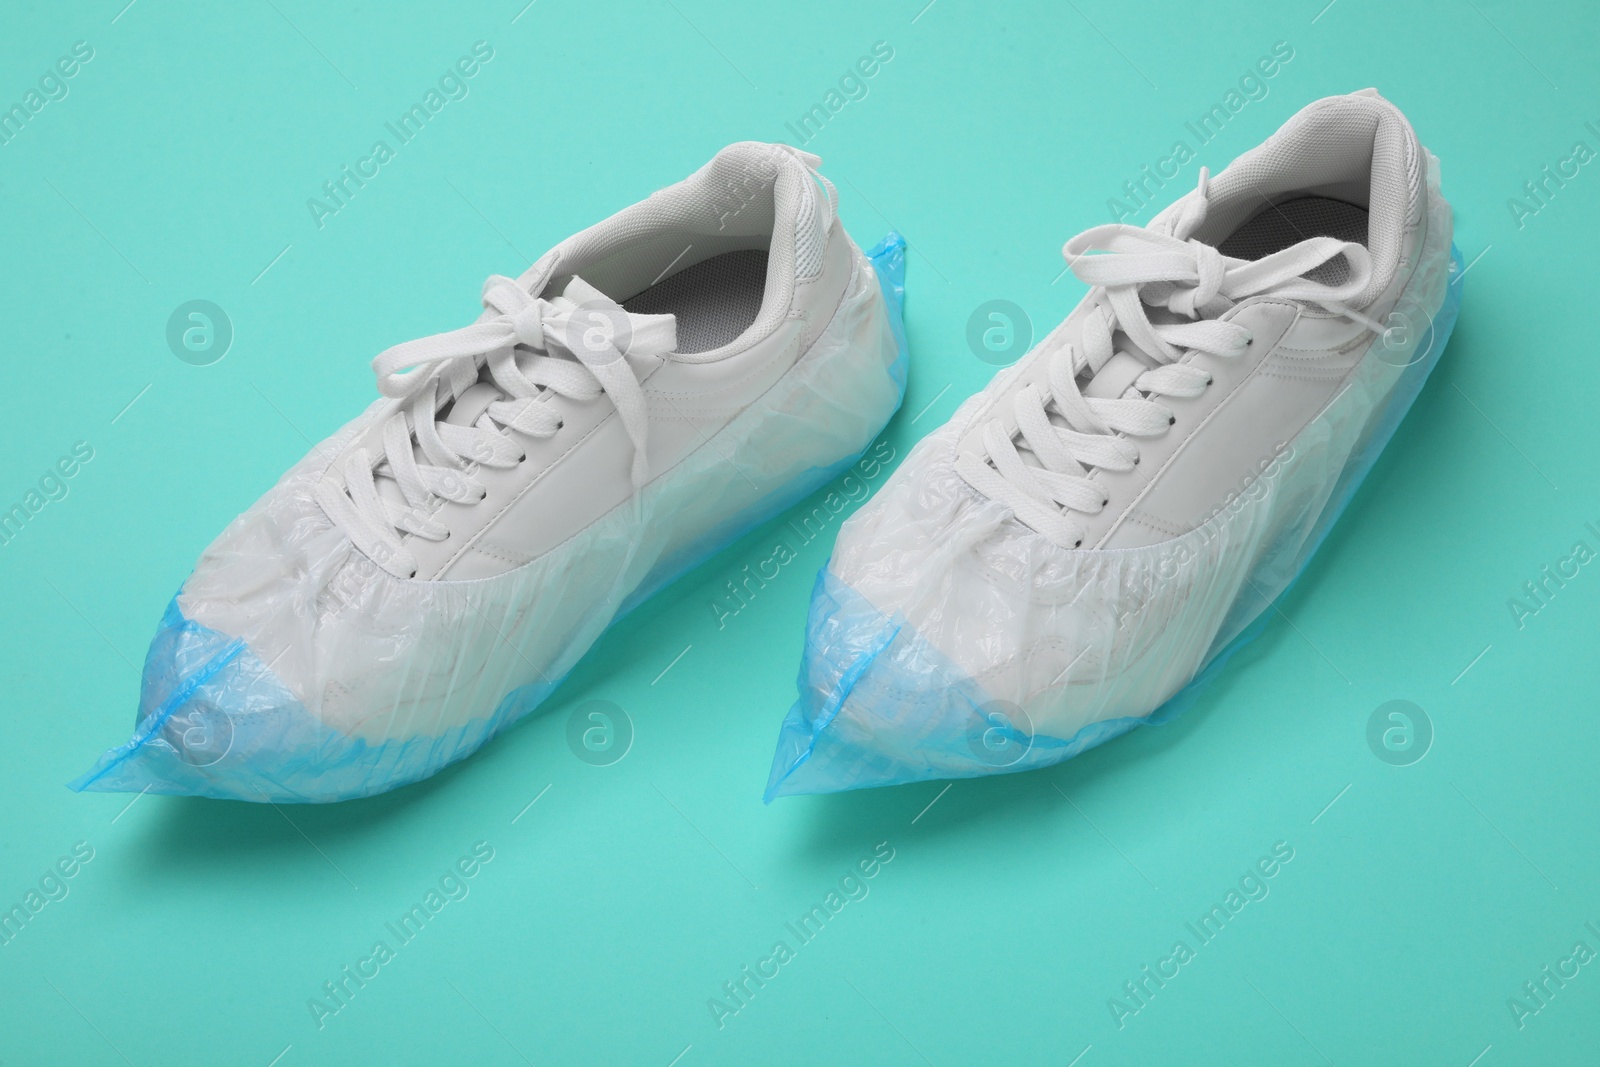 Photo of Sneakers in shoe covers on turquoise background, closeup